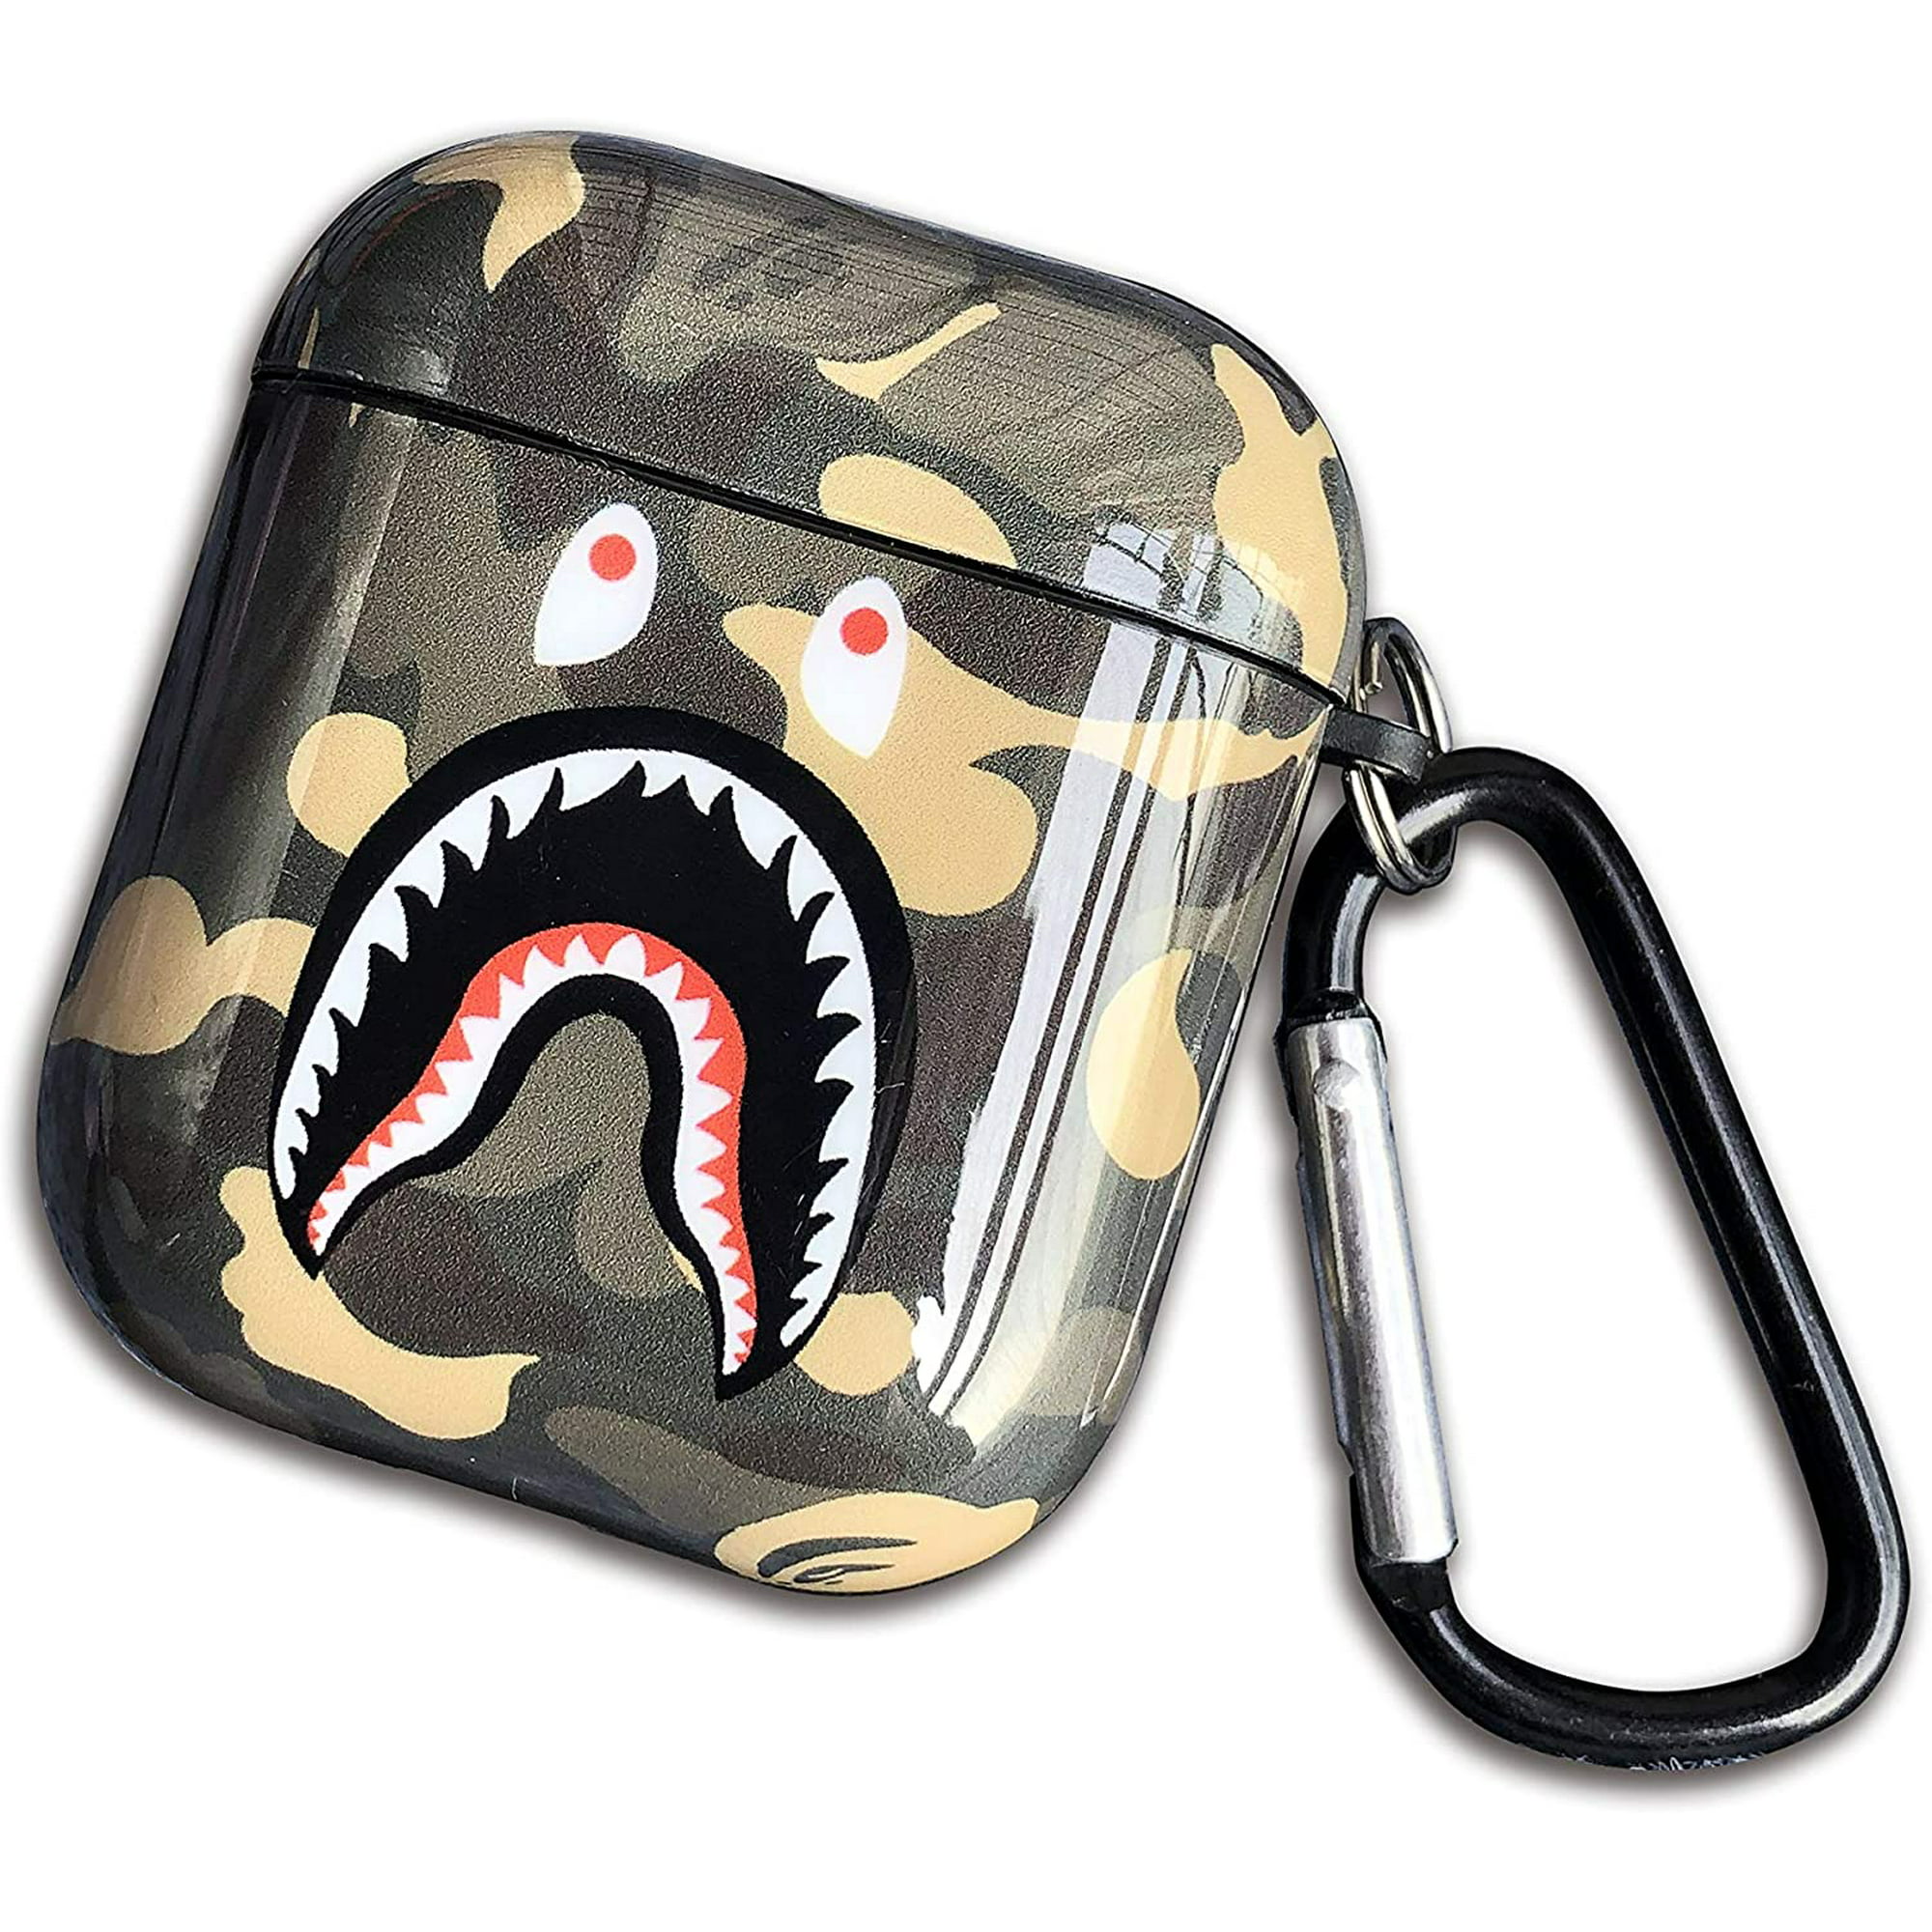 Shark Teeth Softshell Silicone Camouflage AirPods Case, IMD Case Shockproof Case Skin with Key Ring, Suitable for Apple AirPods 1 & 2 Charging Box (